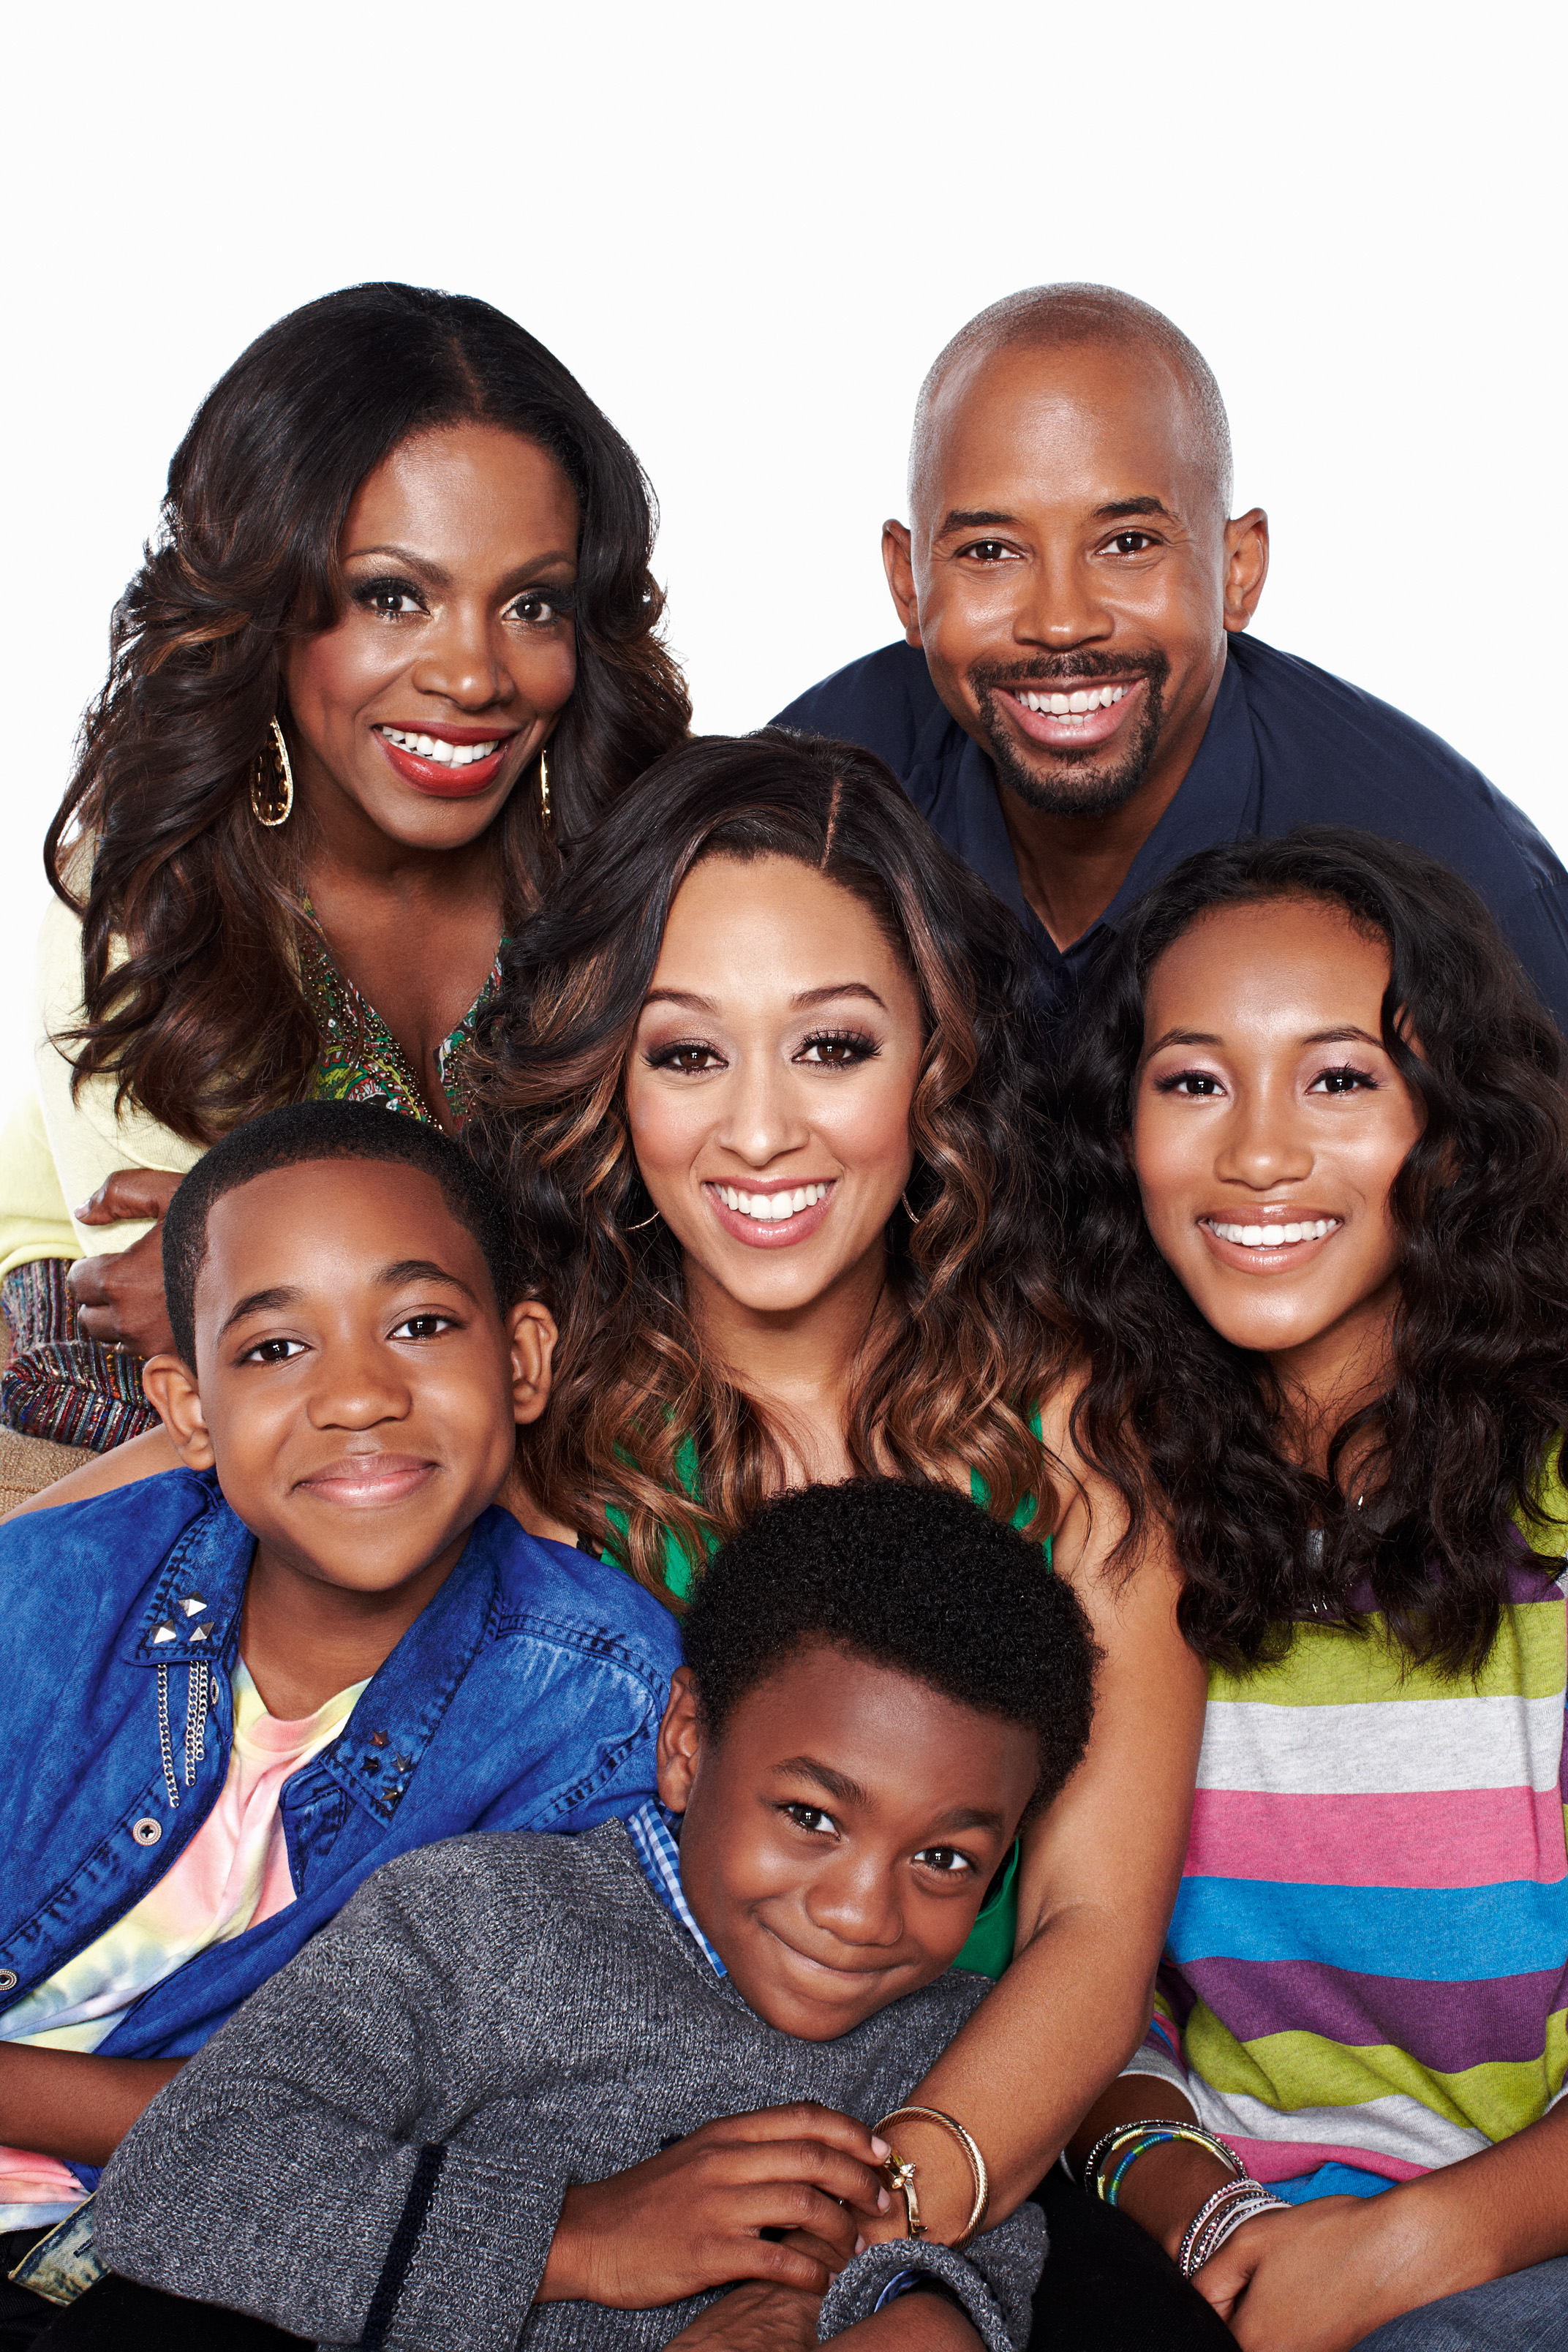 Sydney Park in Instant Mom